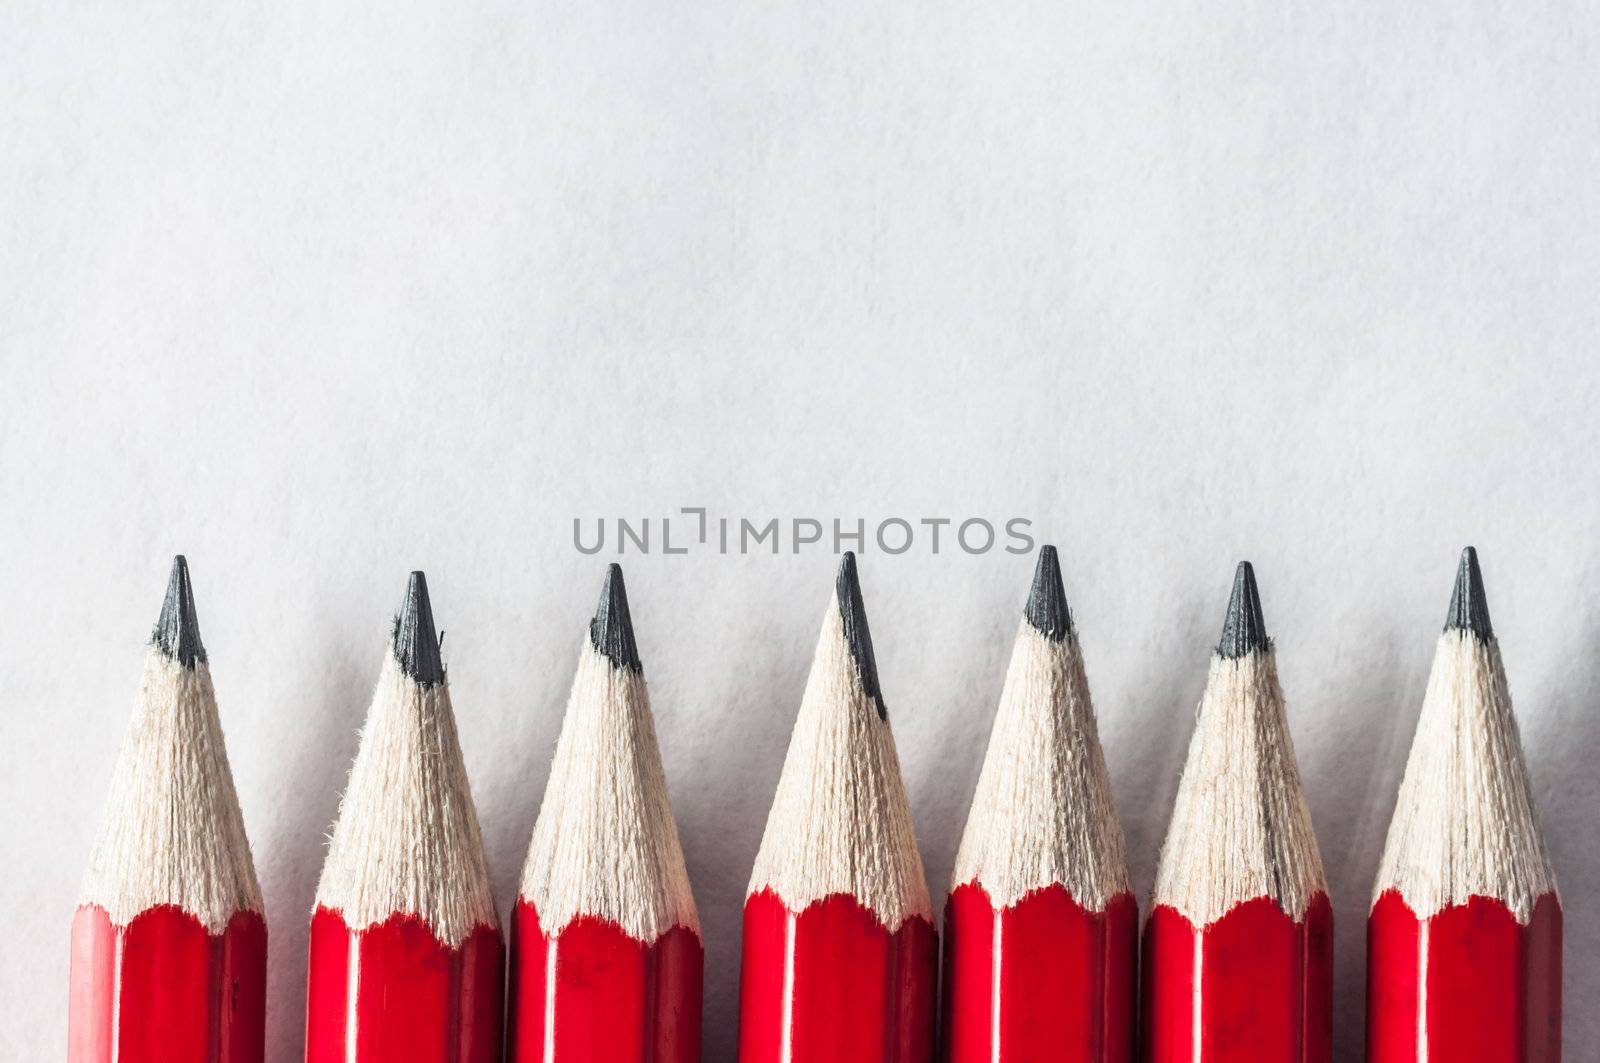 A row of roughly sharpened, grubby red pencils on textured art paper, bordering the bottom of the frame.  Lit and processed to give an old fashioned, vintage appearance.